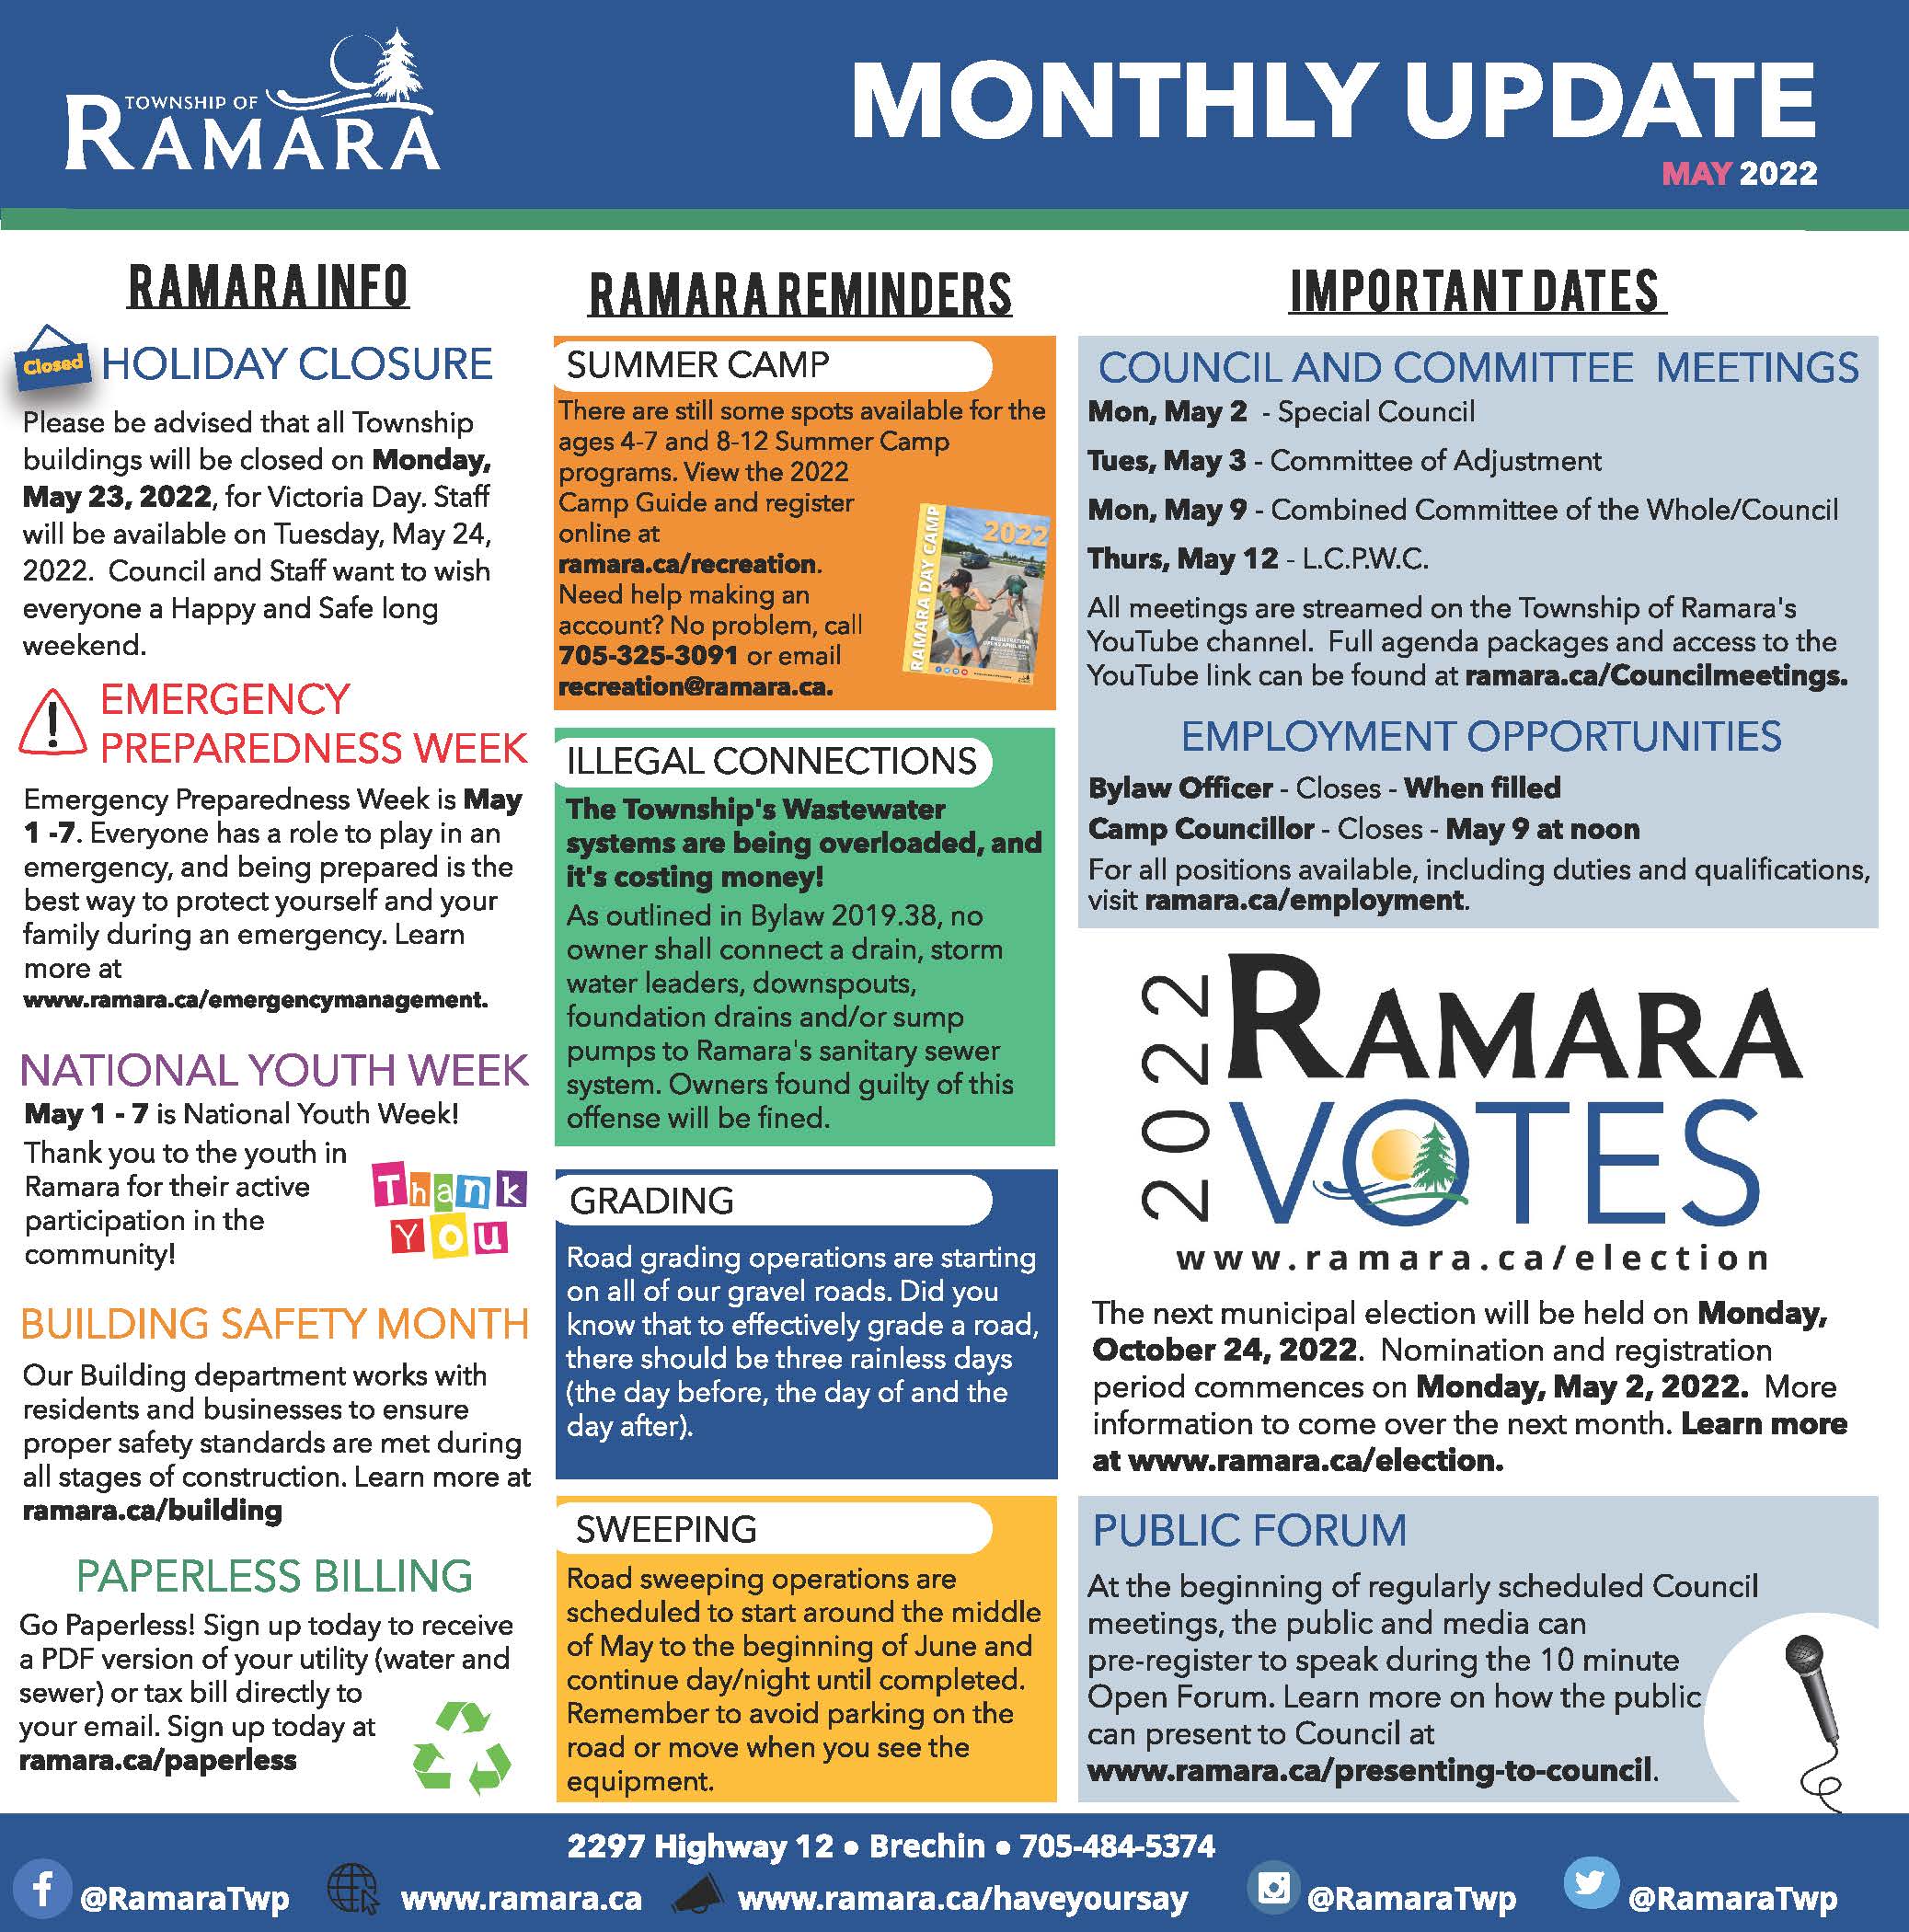 May edition of the Ramara Bulletin that lists all the news and important updates for Ramara Township. 